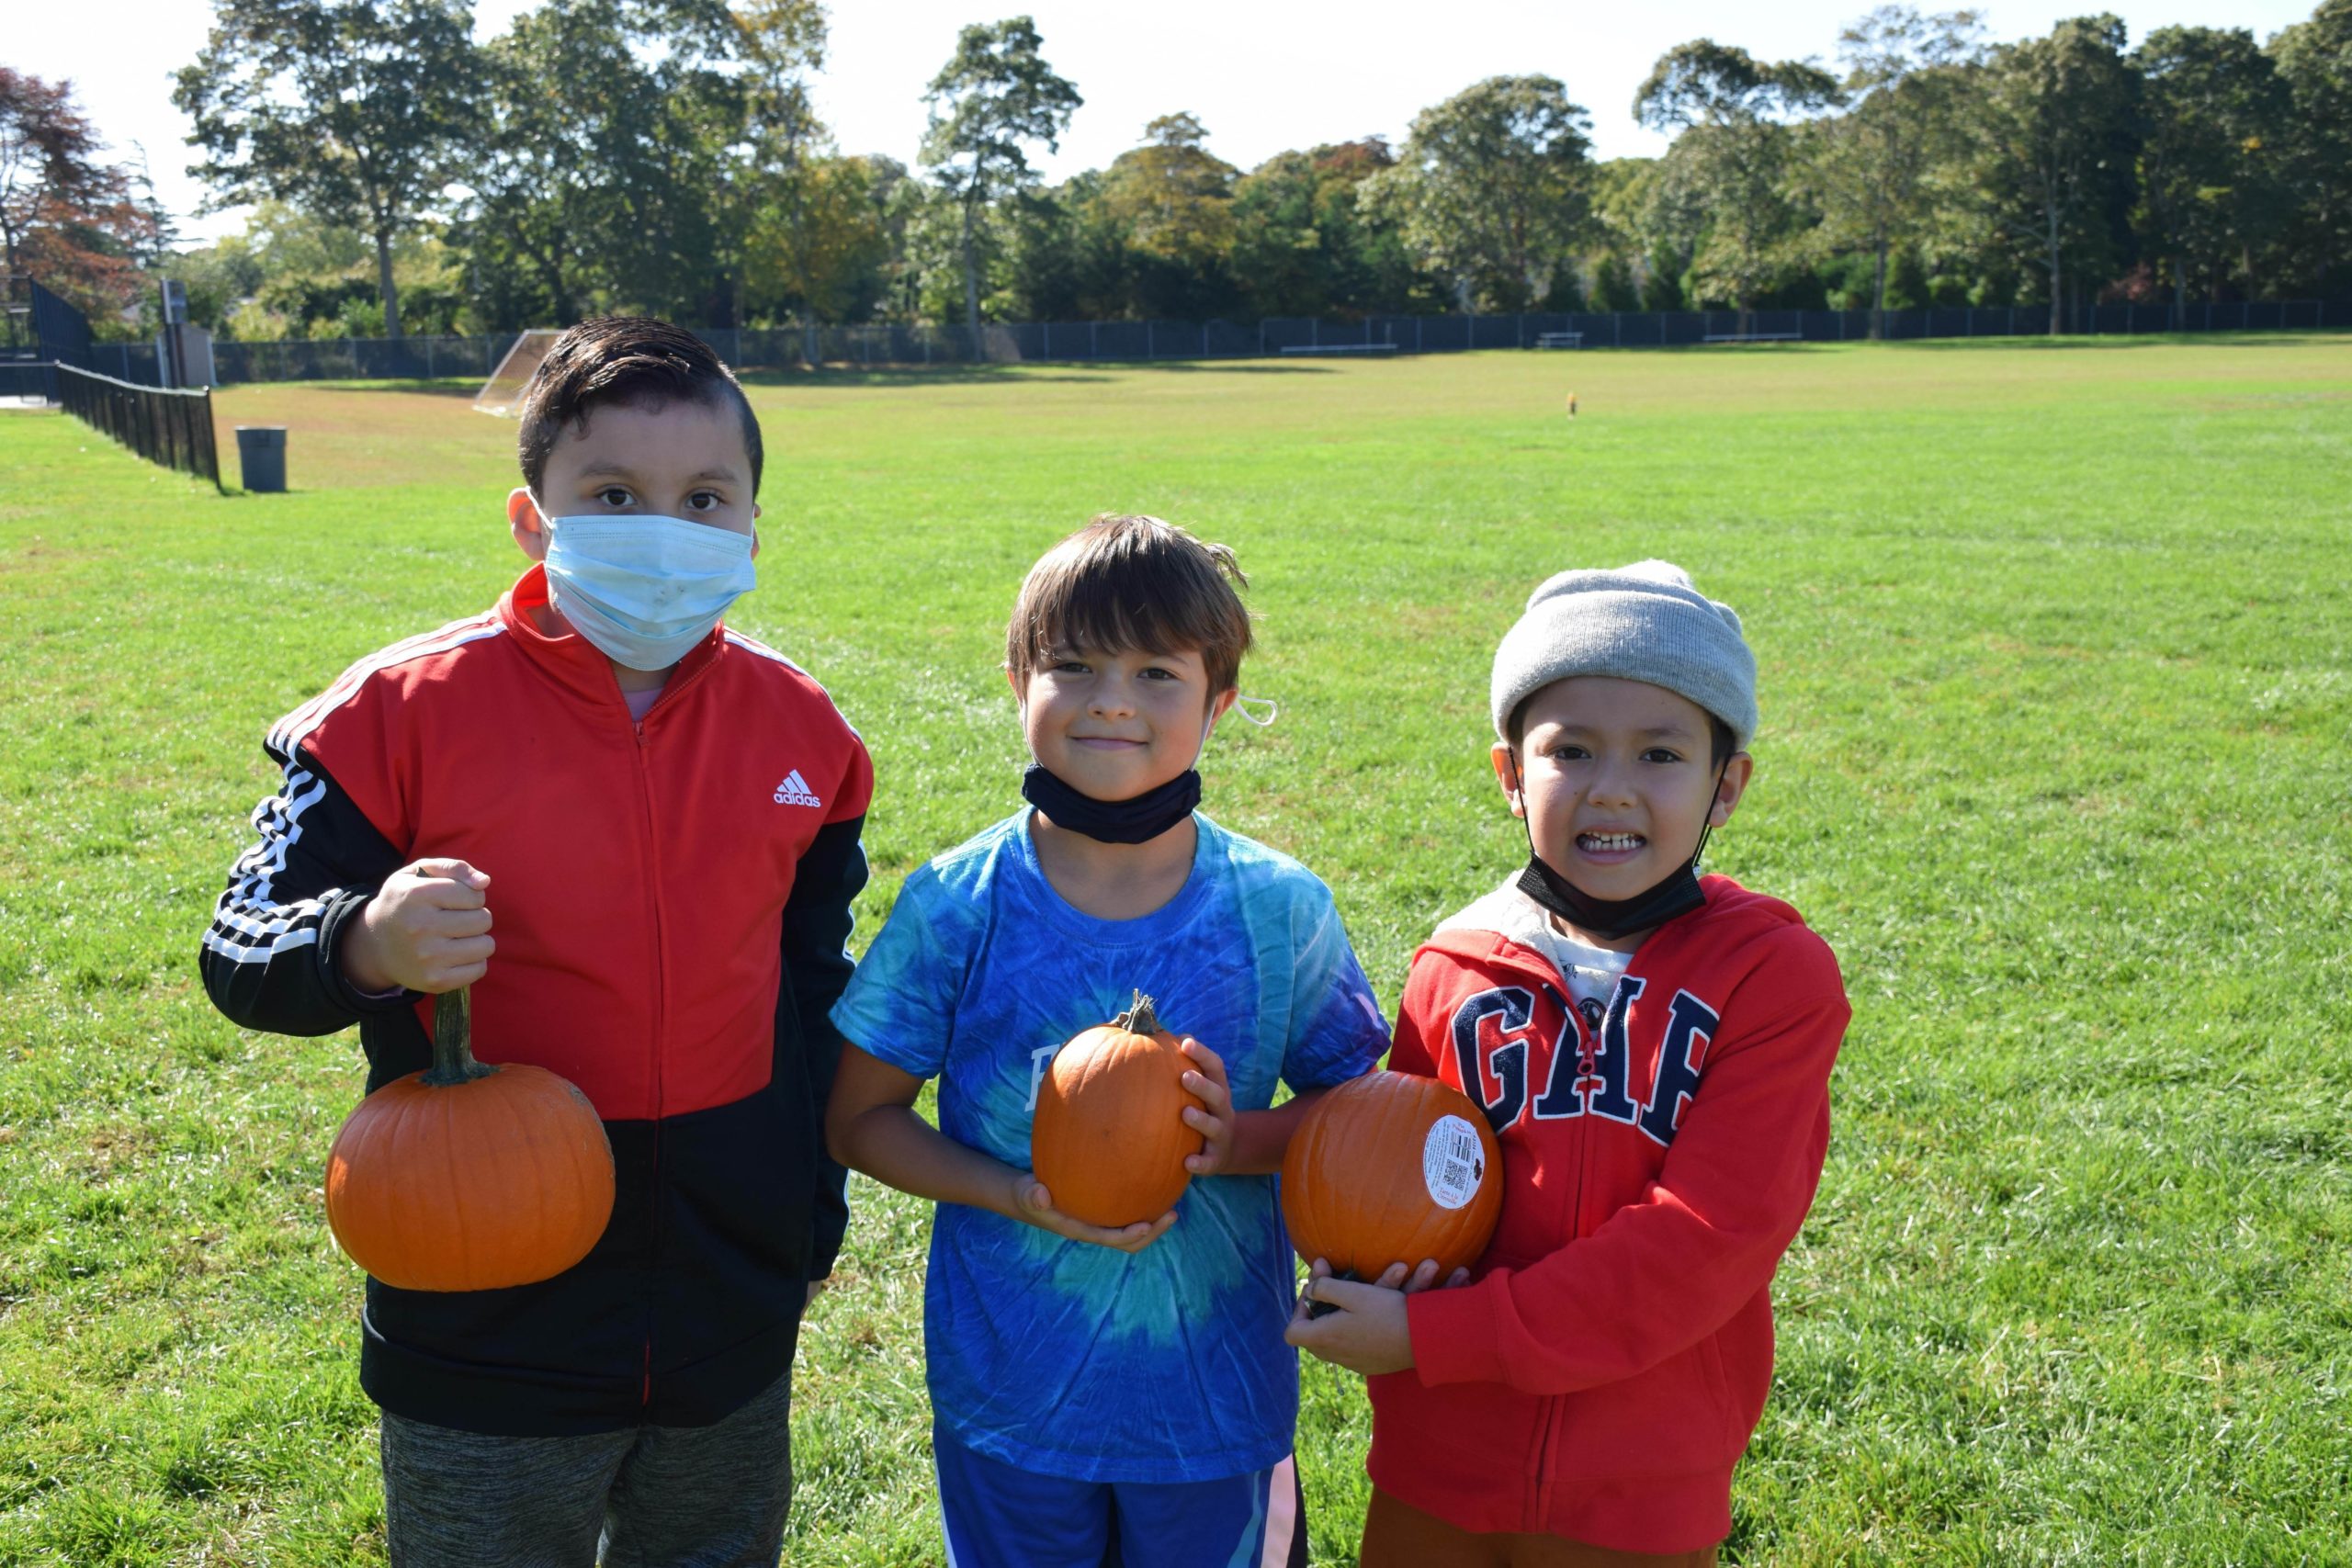 Hampton Bays Elementary School students participated in a pumpkin picking event on October 21. The school field was strewn with pumpkins donated by the Southampton Officers Association and Dan Schmidt of Schmidt’s Market and Produce of Southampton.